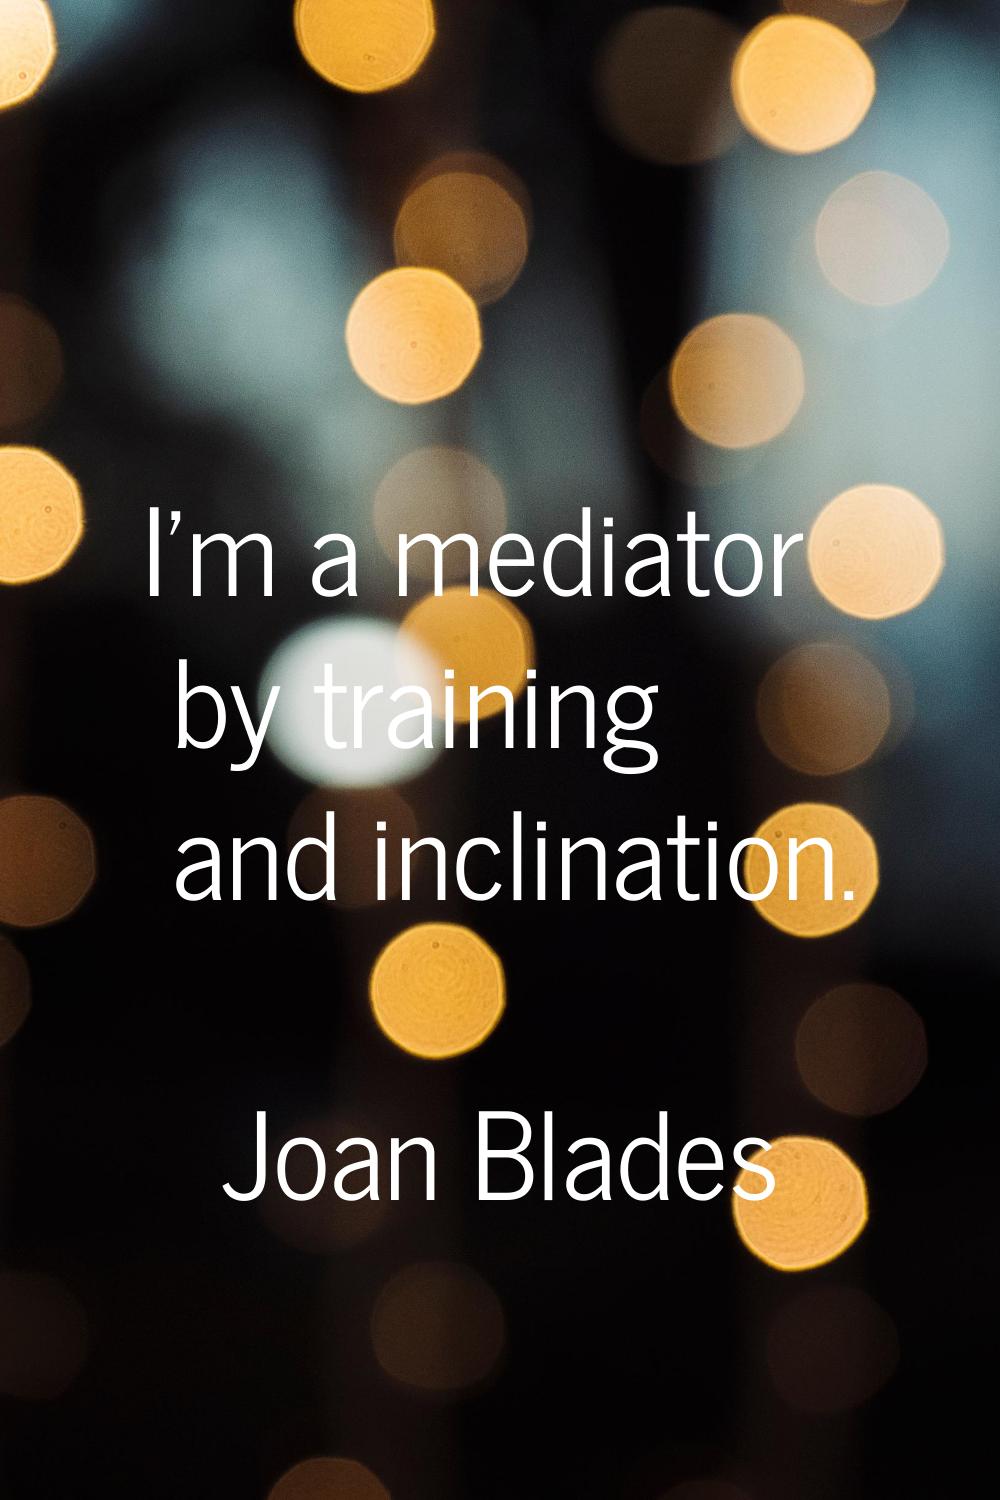 I'm a mediator by training and inclination.